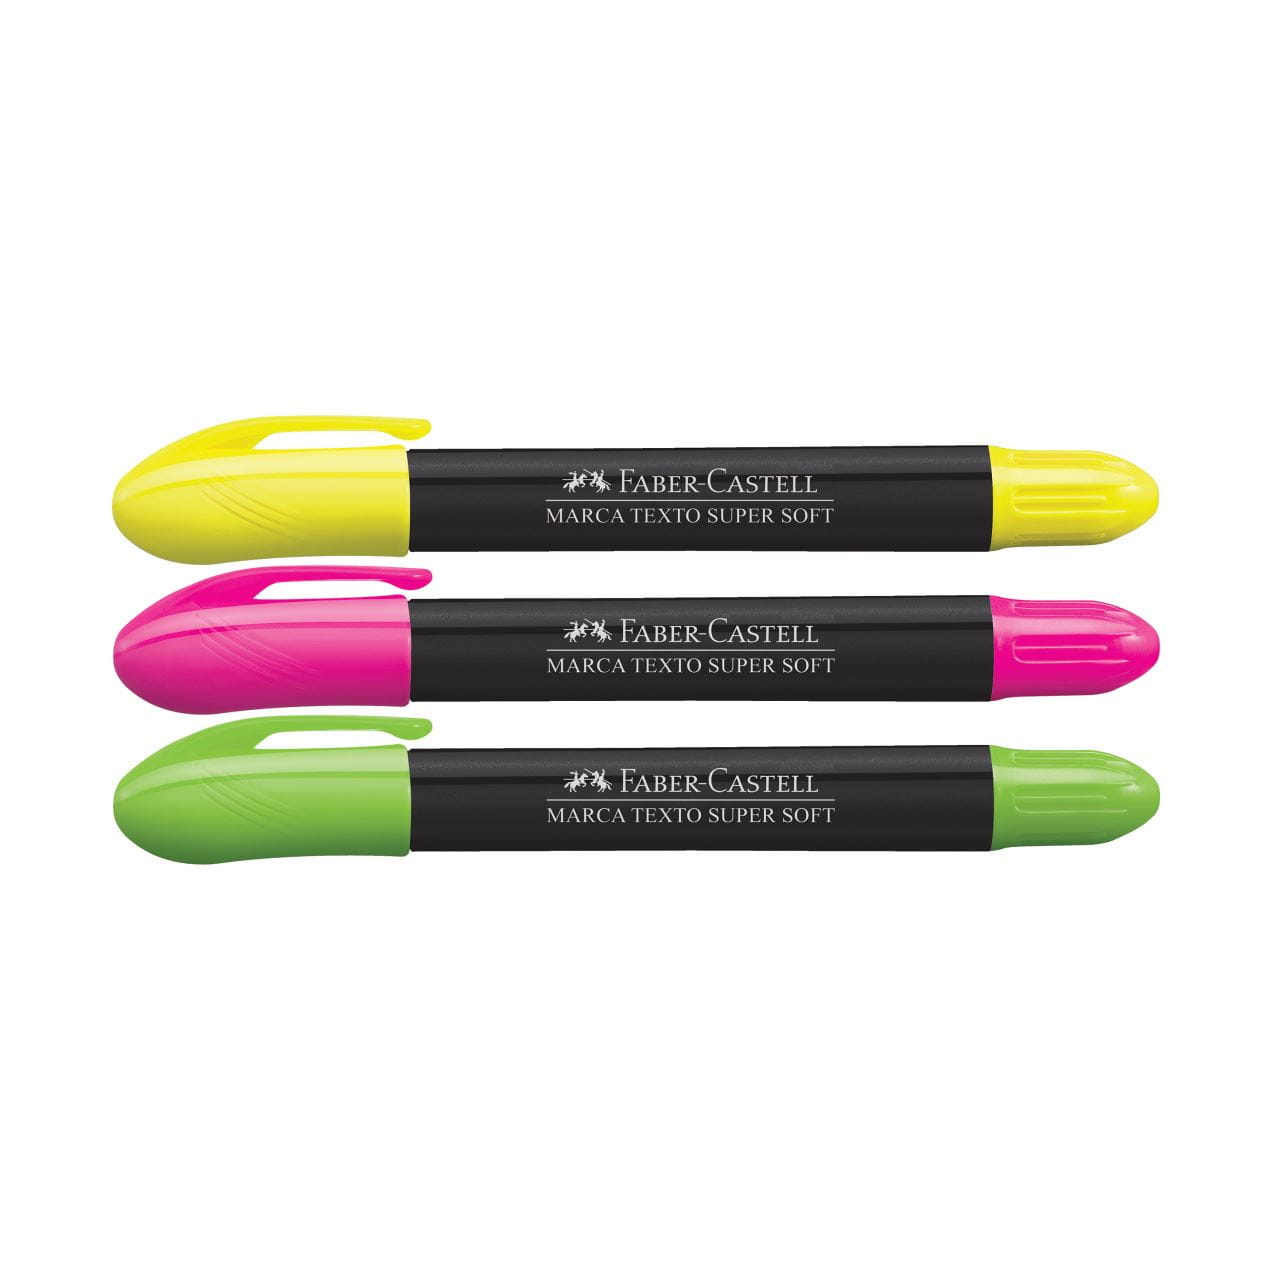 Faber-Castell - Marca Texto SuperSoft Gel Colors